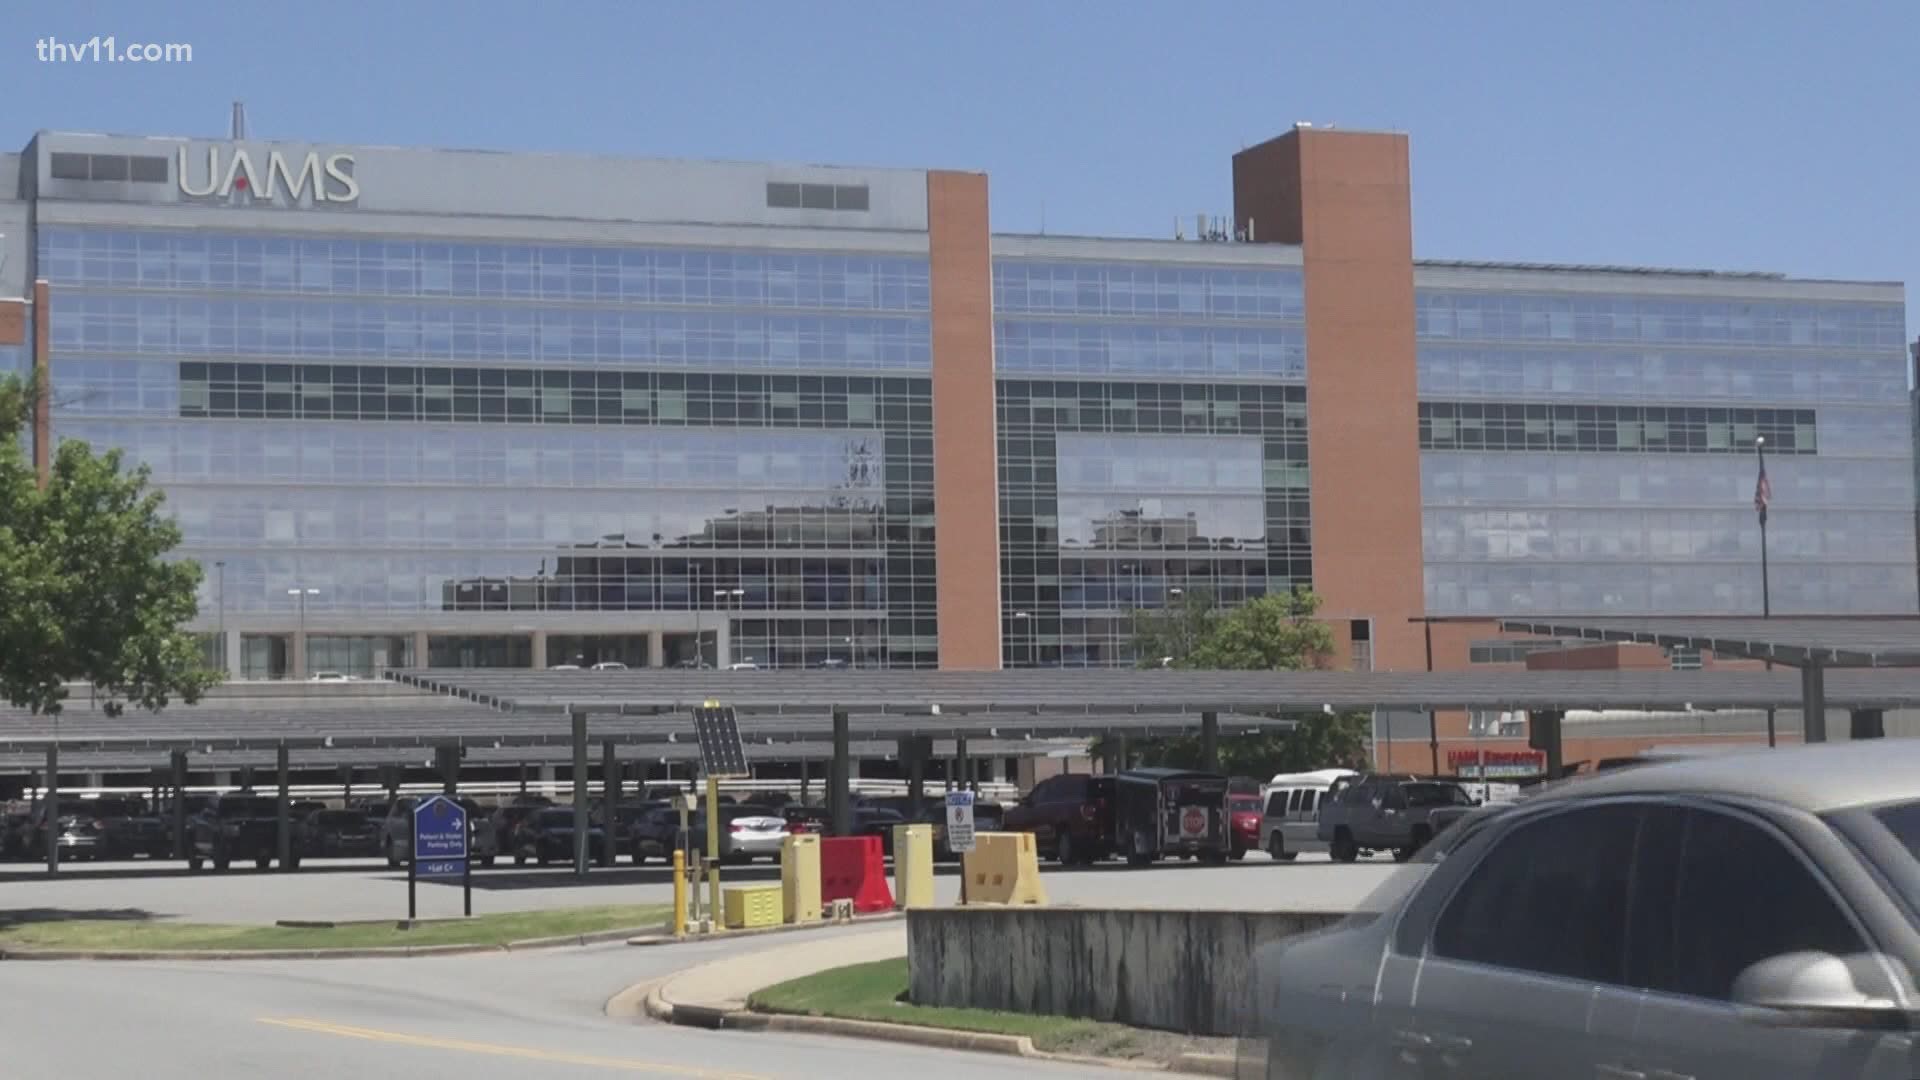 UAMS got close to a million dollars in funds to help with the COVID-19 response across the state. A big part of this is putting doctor and patients online.